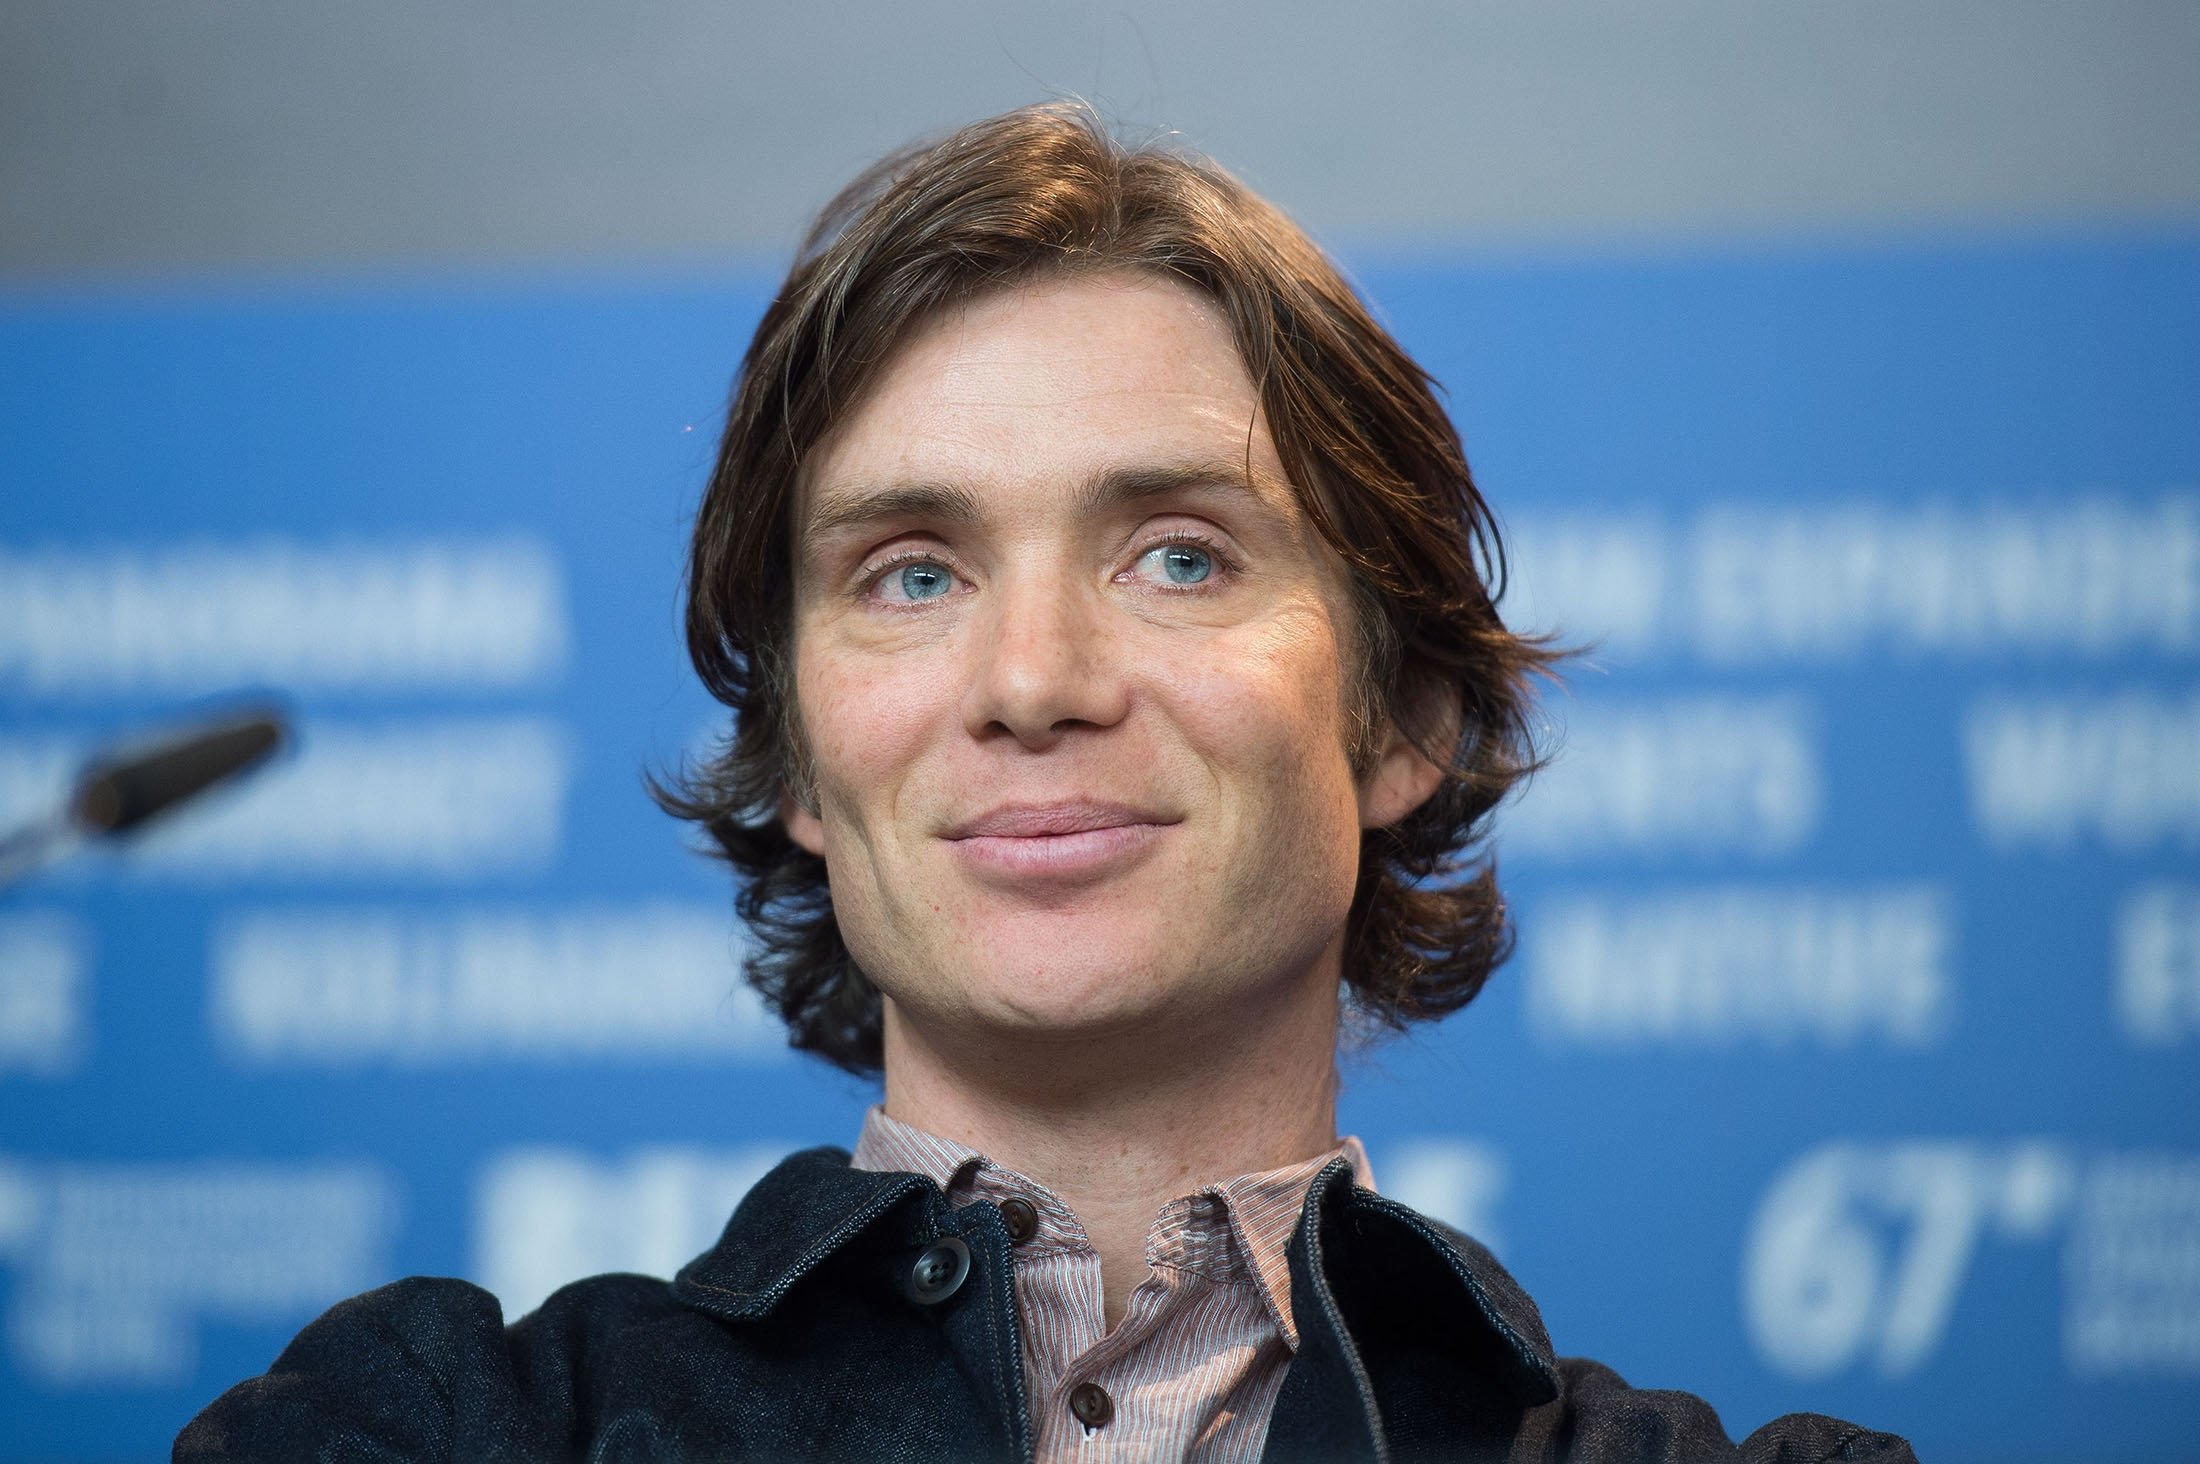 Actor Cillian Murphy attends the "The Party" press conference during the 67th Berlinale International Film Festival Berlin at Grand Hyatt Hotel in Berlin, Germany, Feb. 13, 2017.  (Getty Images)